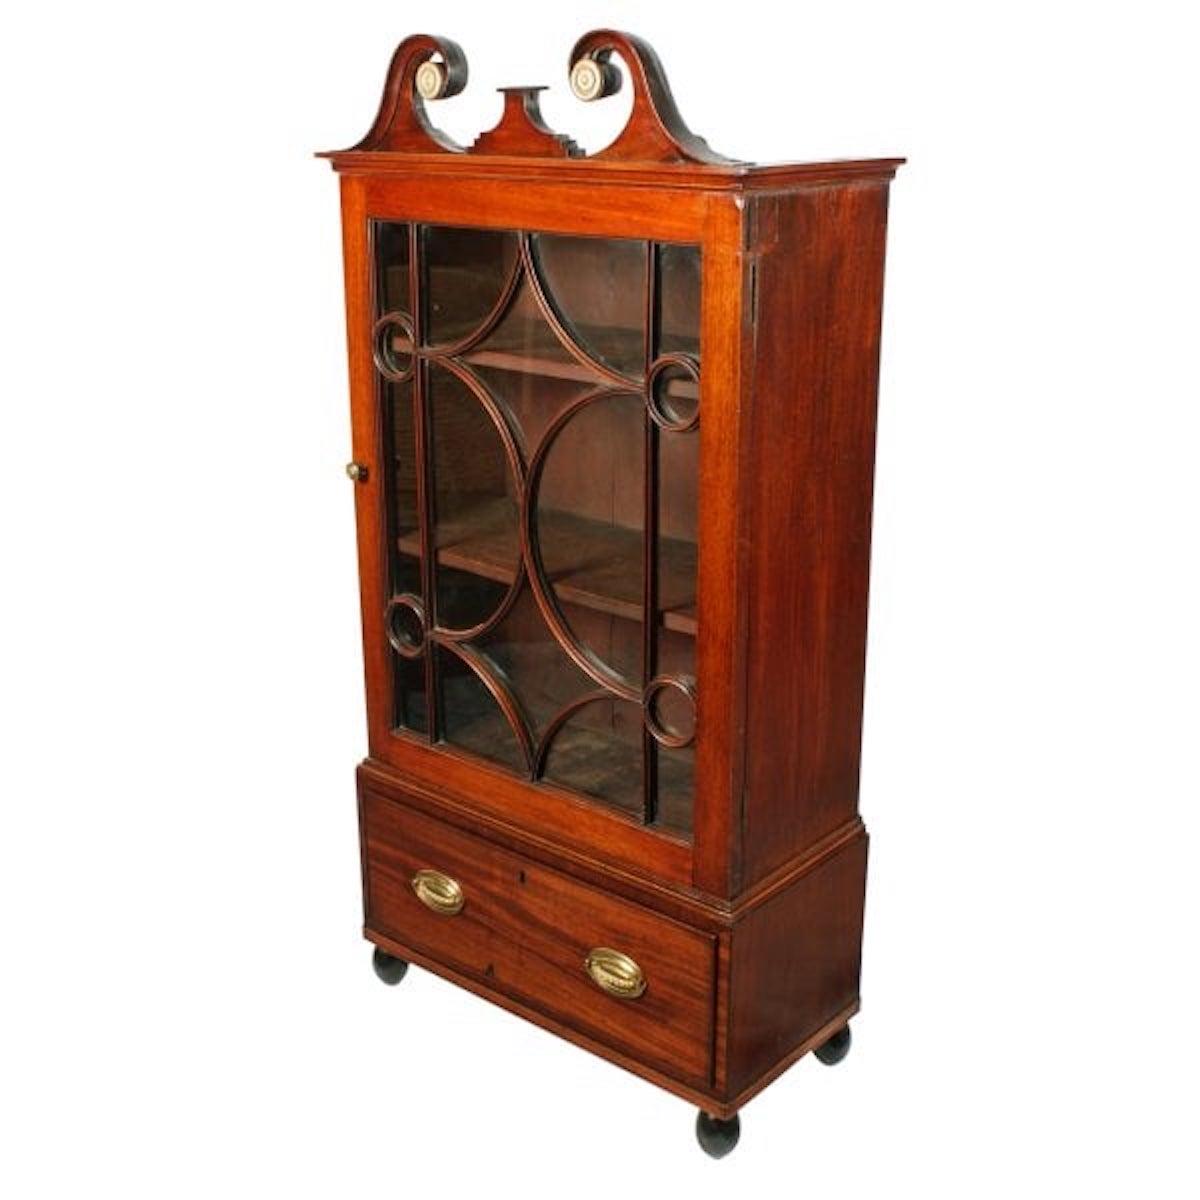 Georgian mahogany dwarf cabinet

An early 19th century Georgian mahogany dwarf cabinet.

The cabinet is of small proportions with a single glazed door, a drawer, a bold swan neck pediment and stands on turned ball feet.

The door has geometric